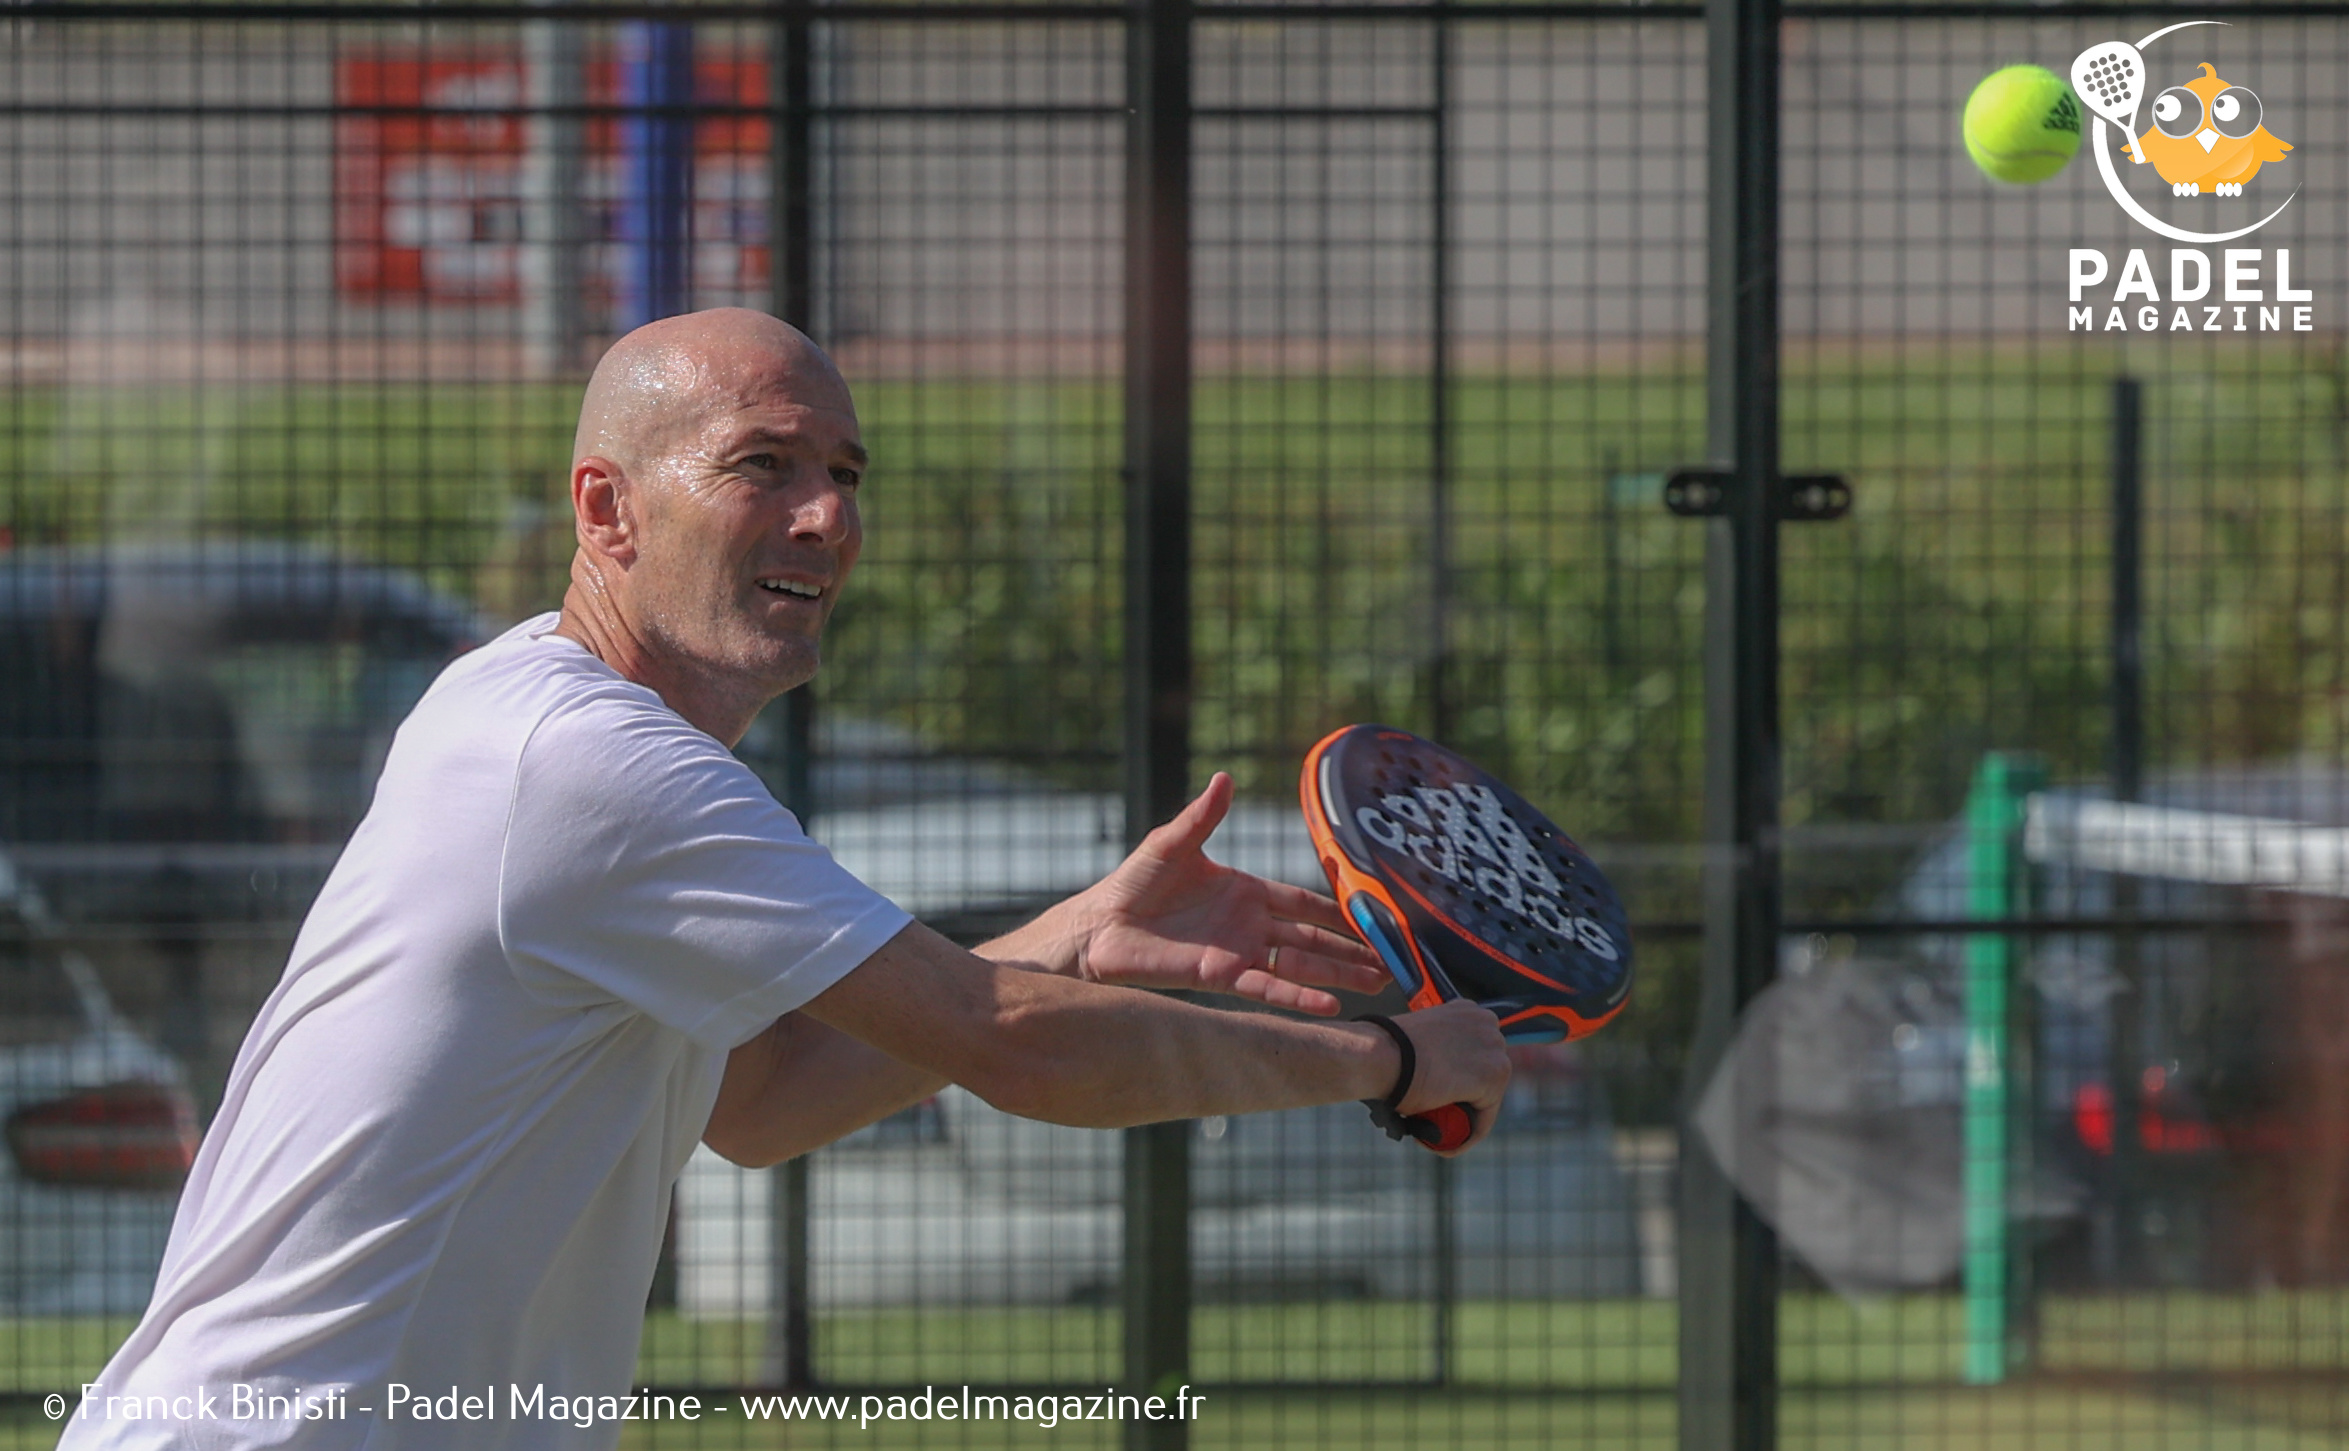 Zidane: “The padel is developing at high speed in France”